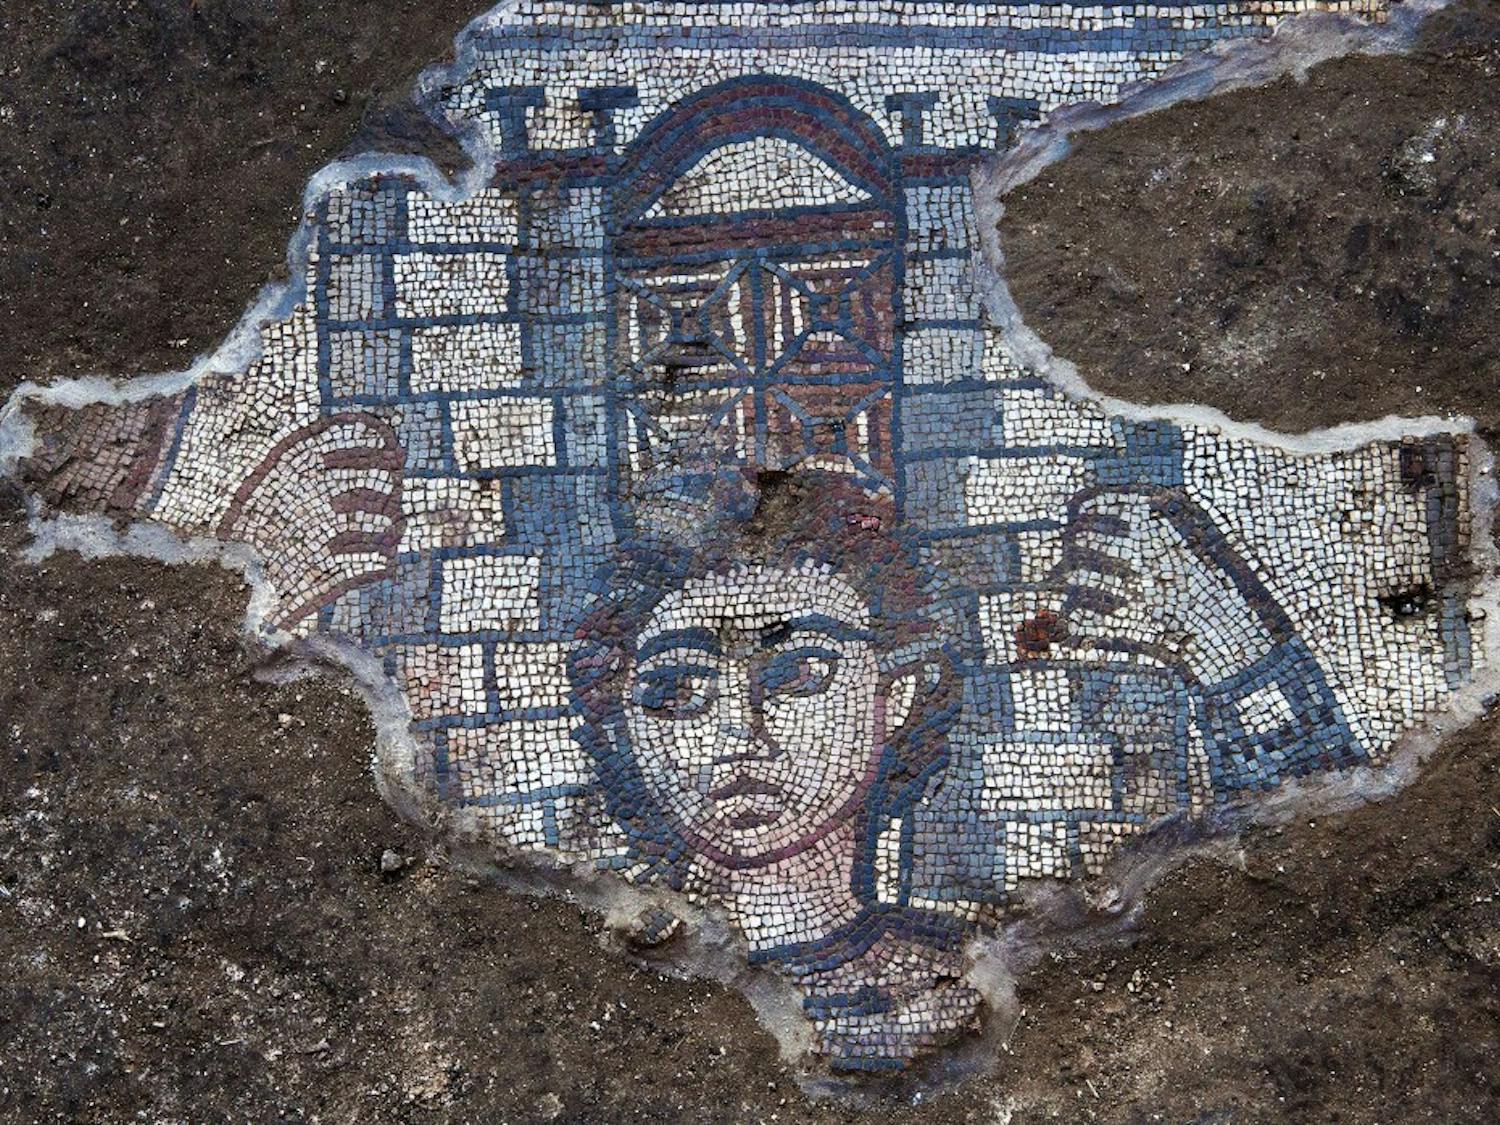 Mosaic showing Samson carrying the gate of Gaza, from the Huqoq 